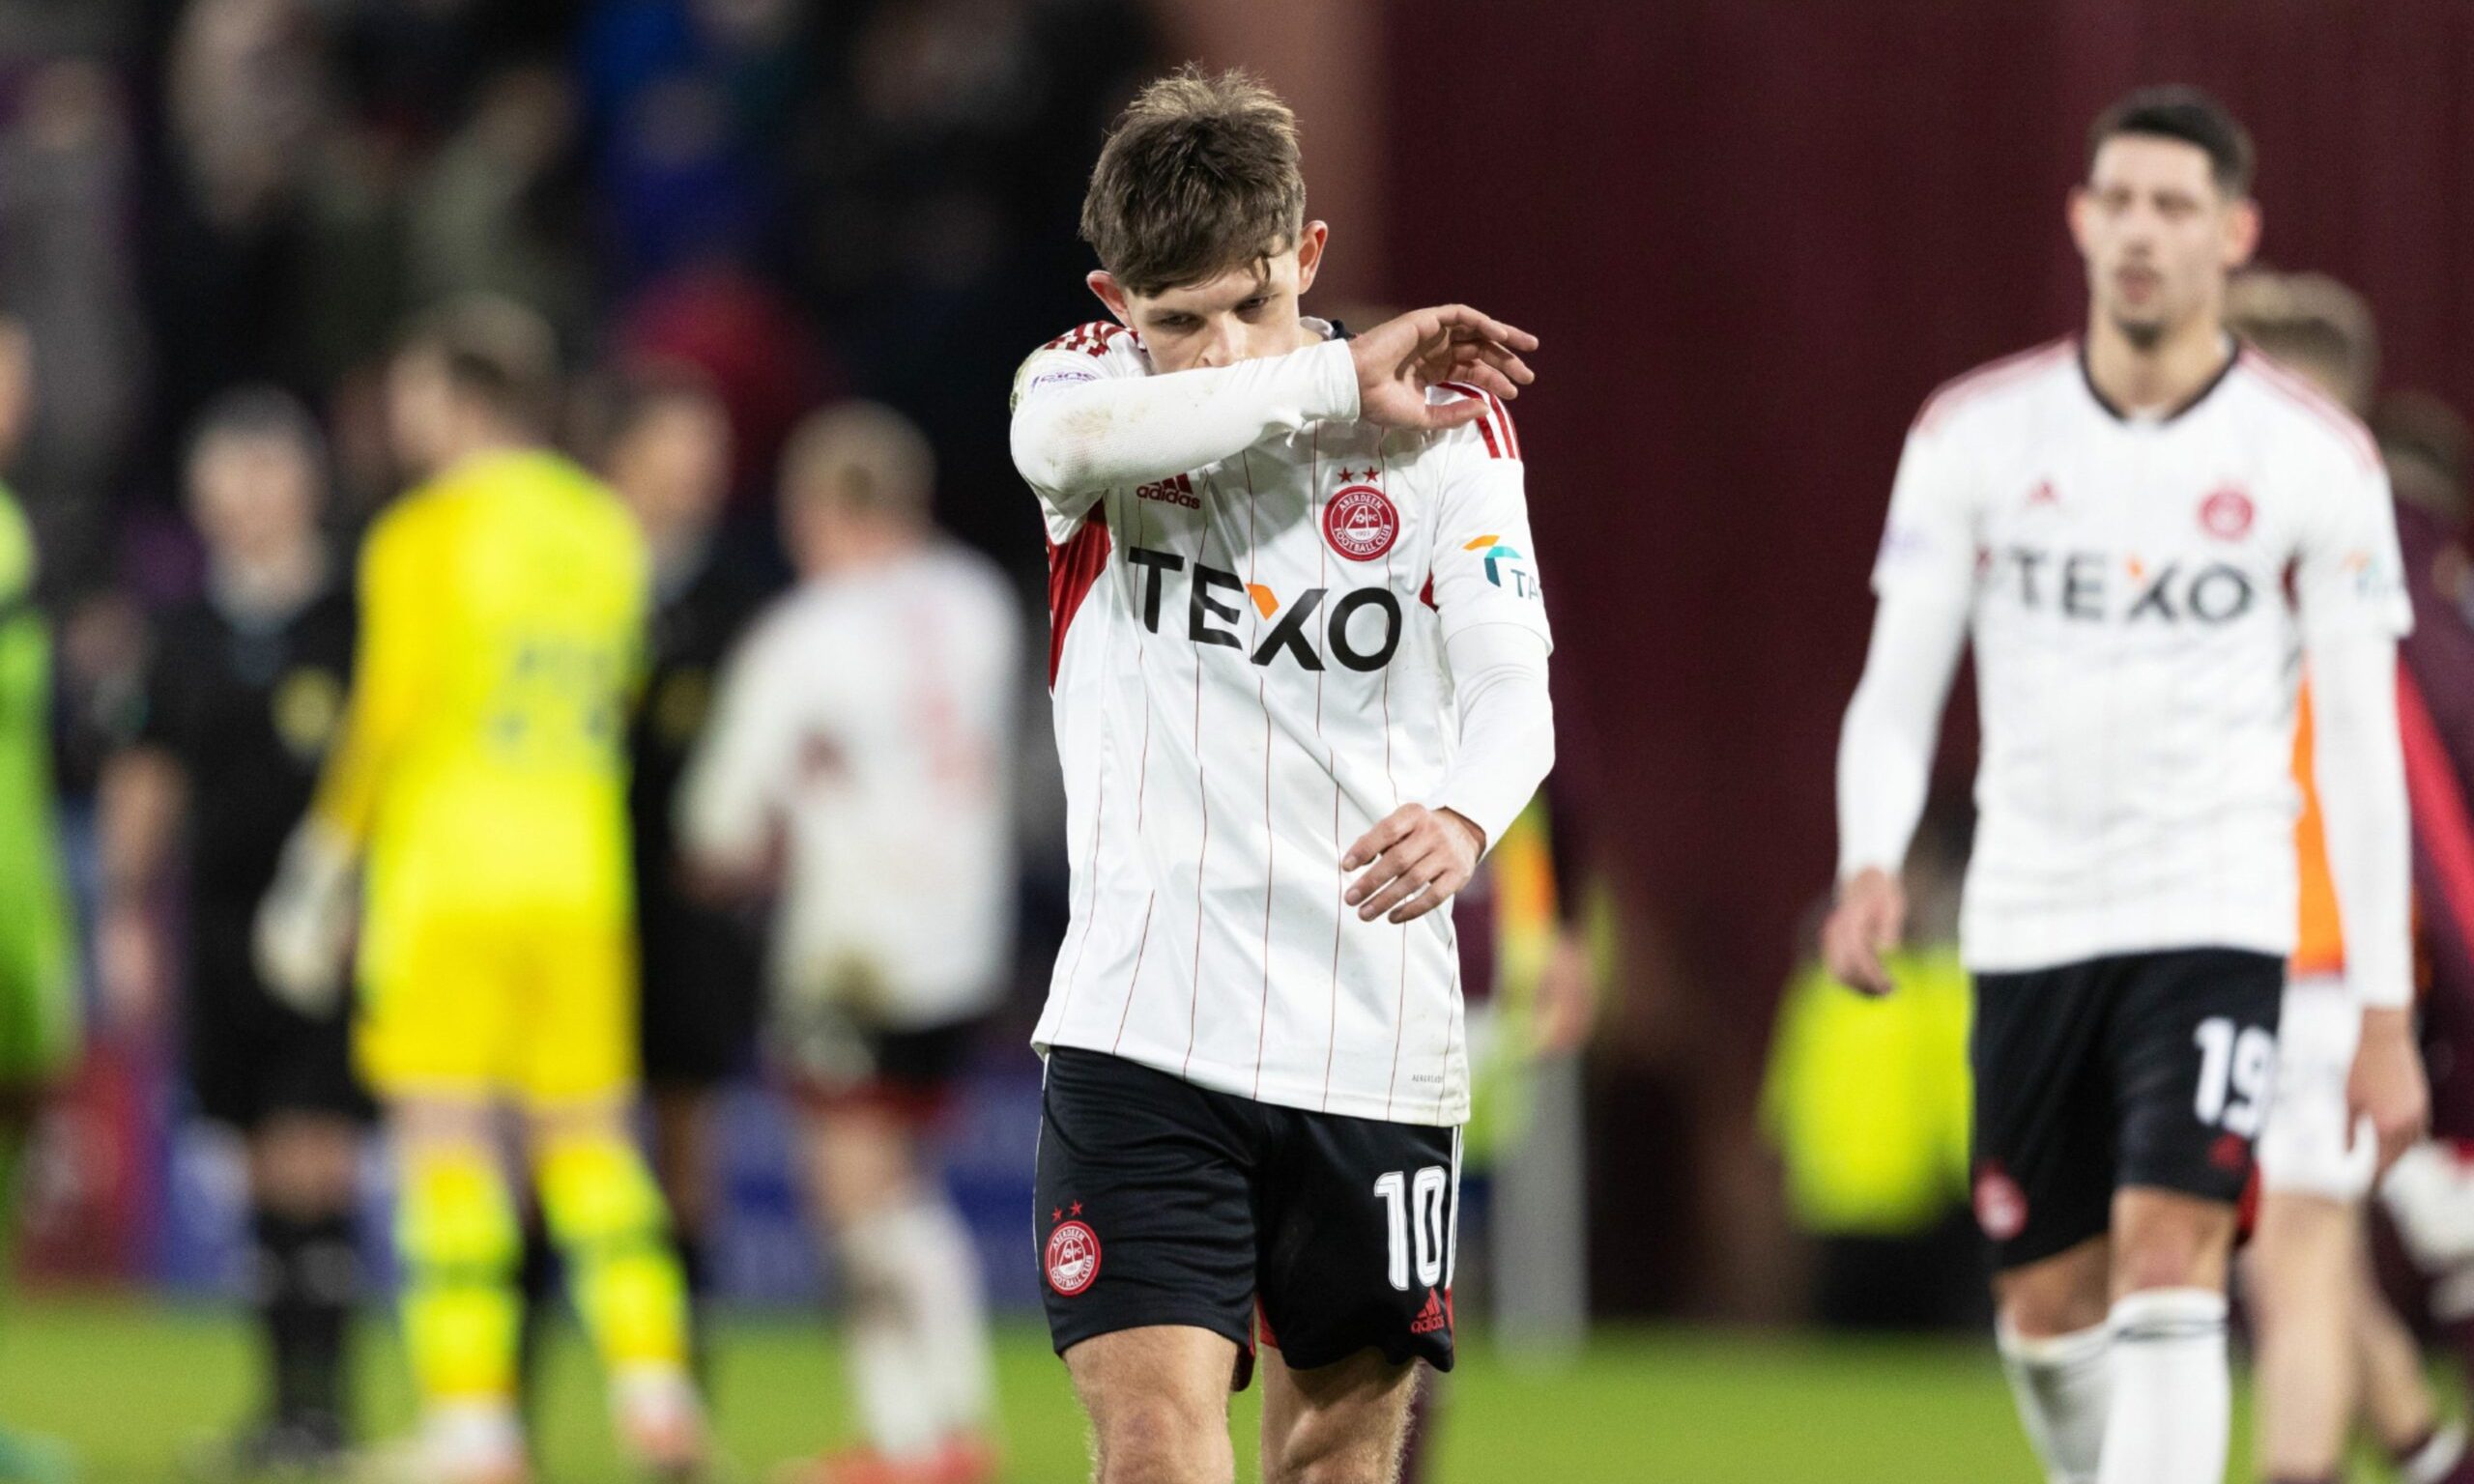 Aberdeen's Leighton Clarkson looks dejected at full time after losing 2-0 to Hearts at Tynecastle. Image: SNS